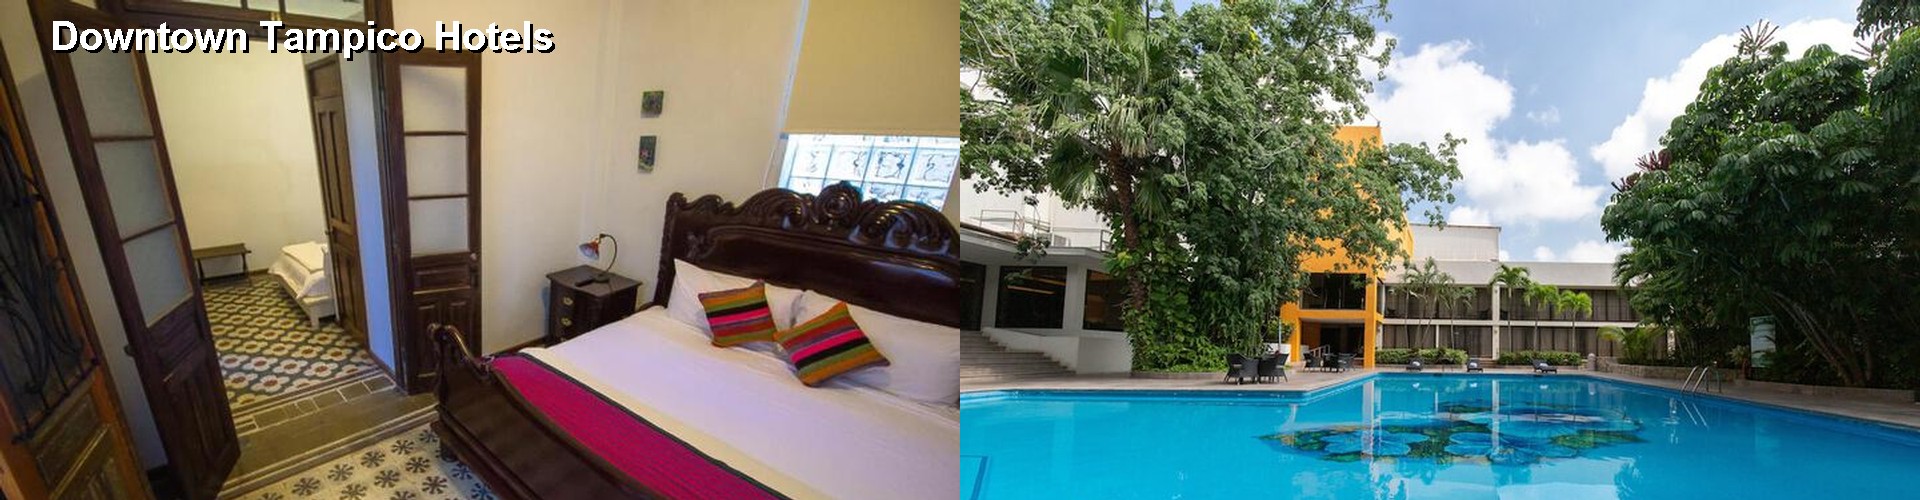 5 Best Hotels near Downtown Tampico